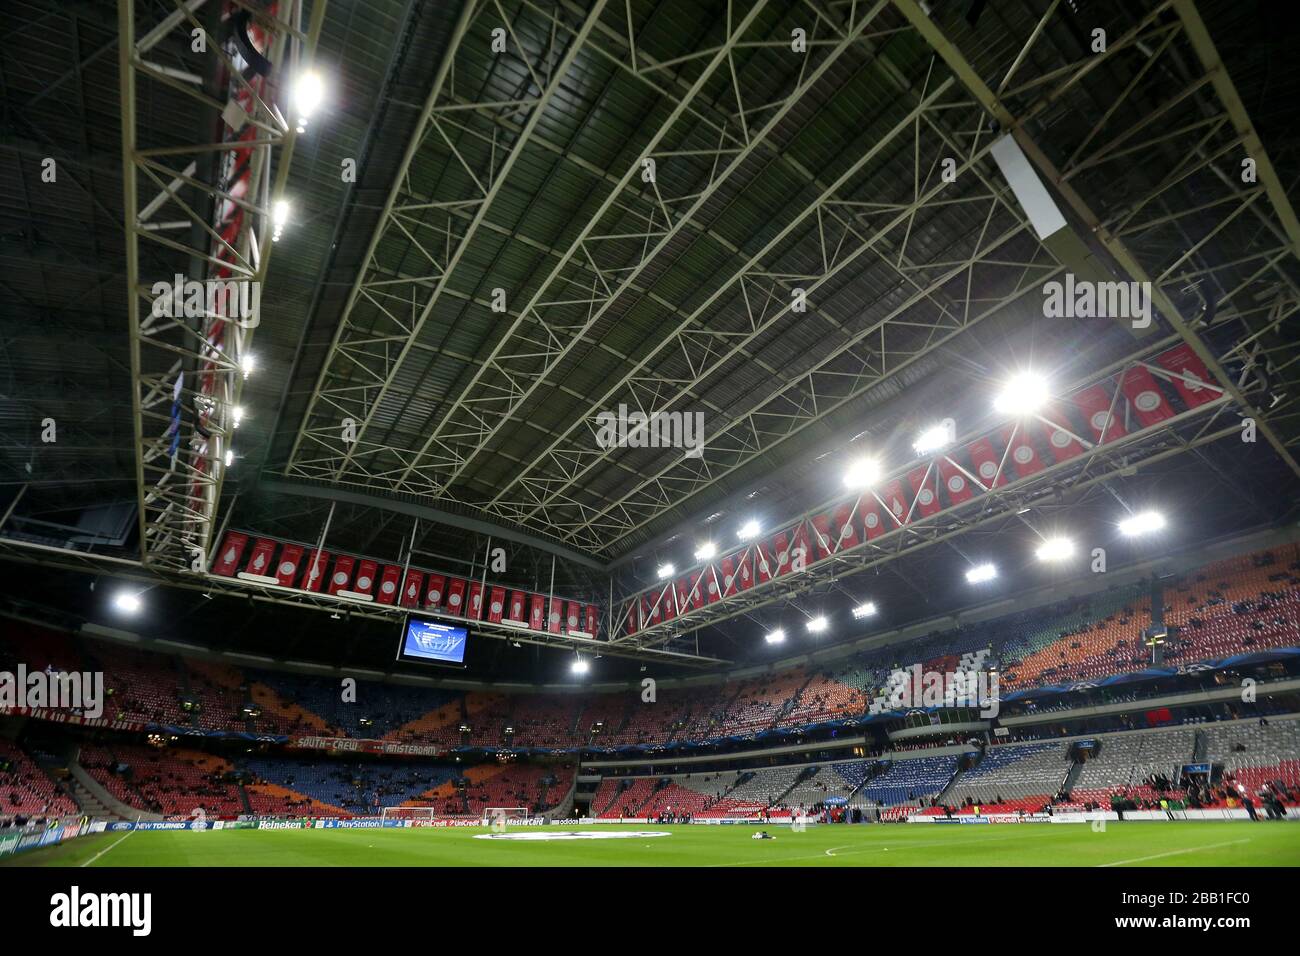 General view of the Amsterdam Arena underneath the closed roof. Stock Photo